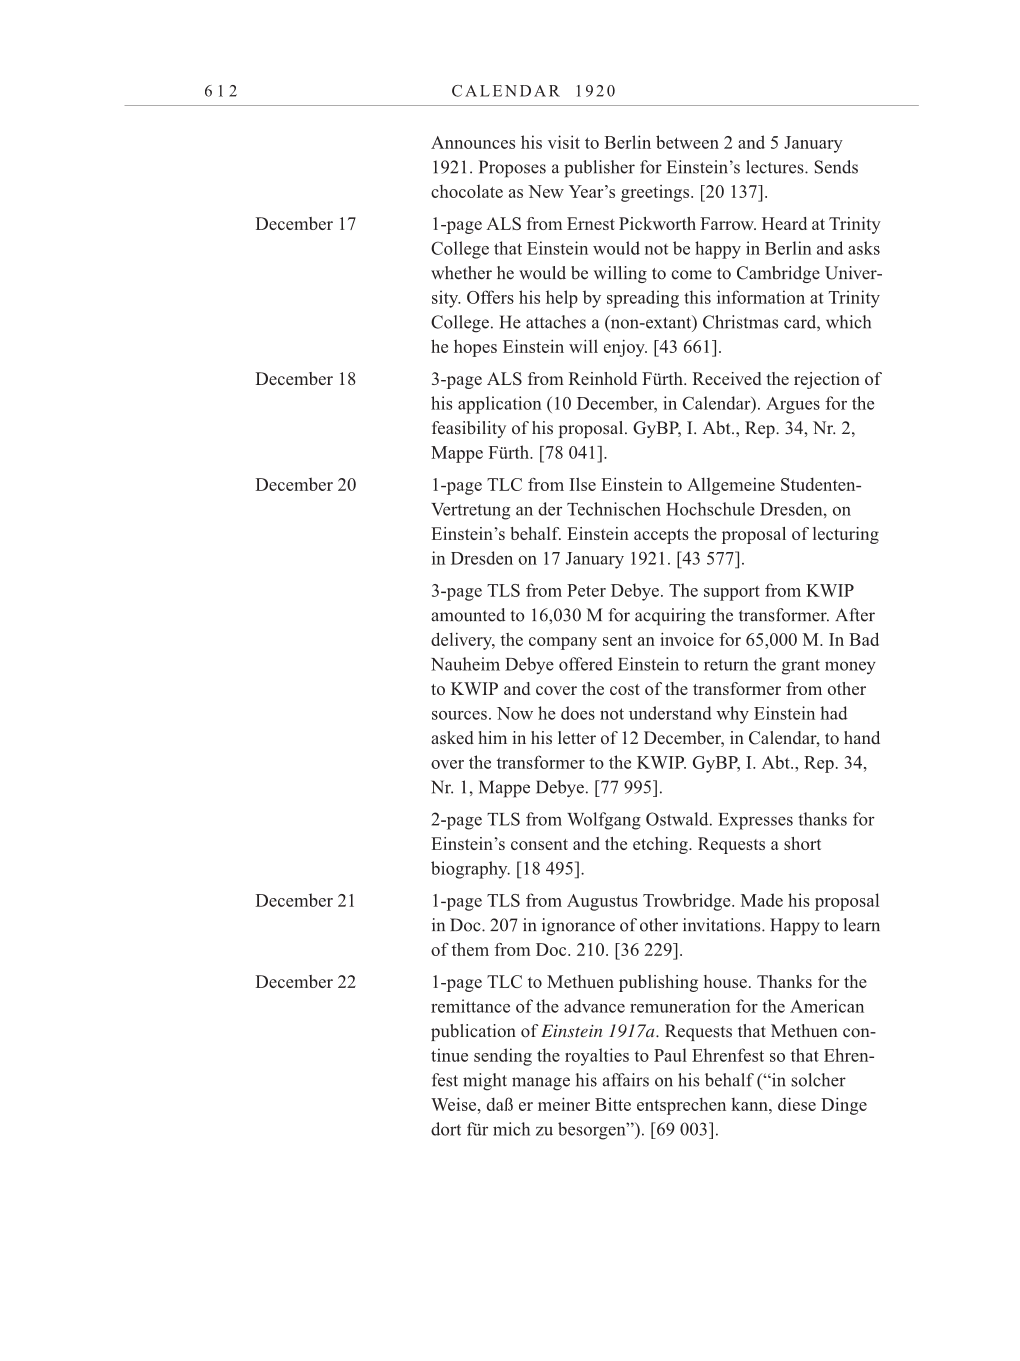 Volume 10: The Berlin Years: Correspondence May-December 1920 / Supplementary Correspondence 1909-1920 page 612